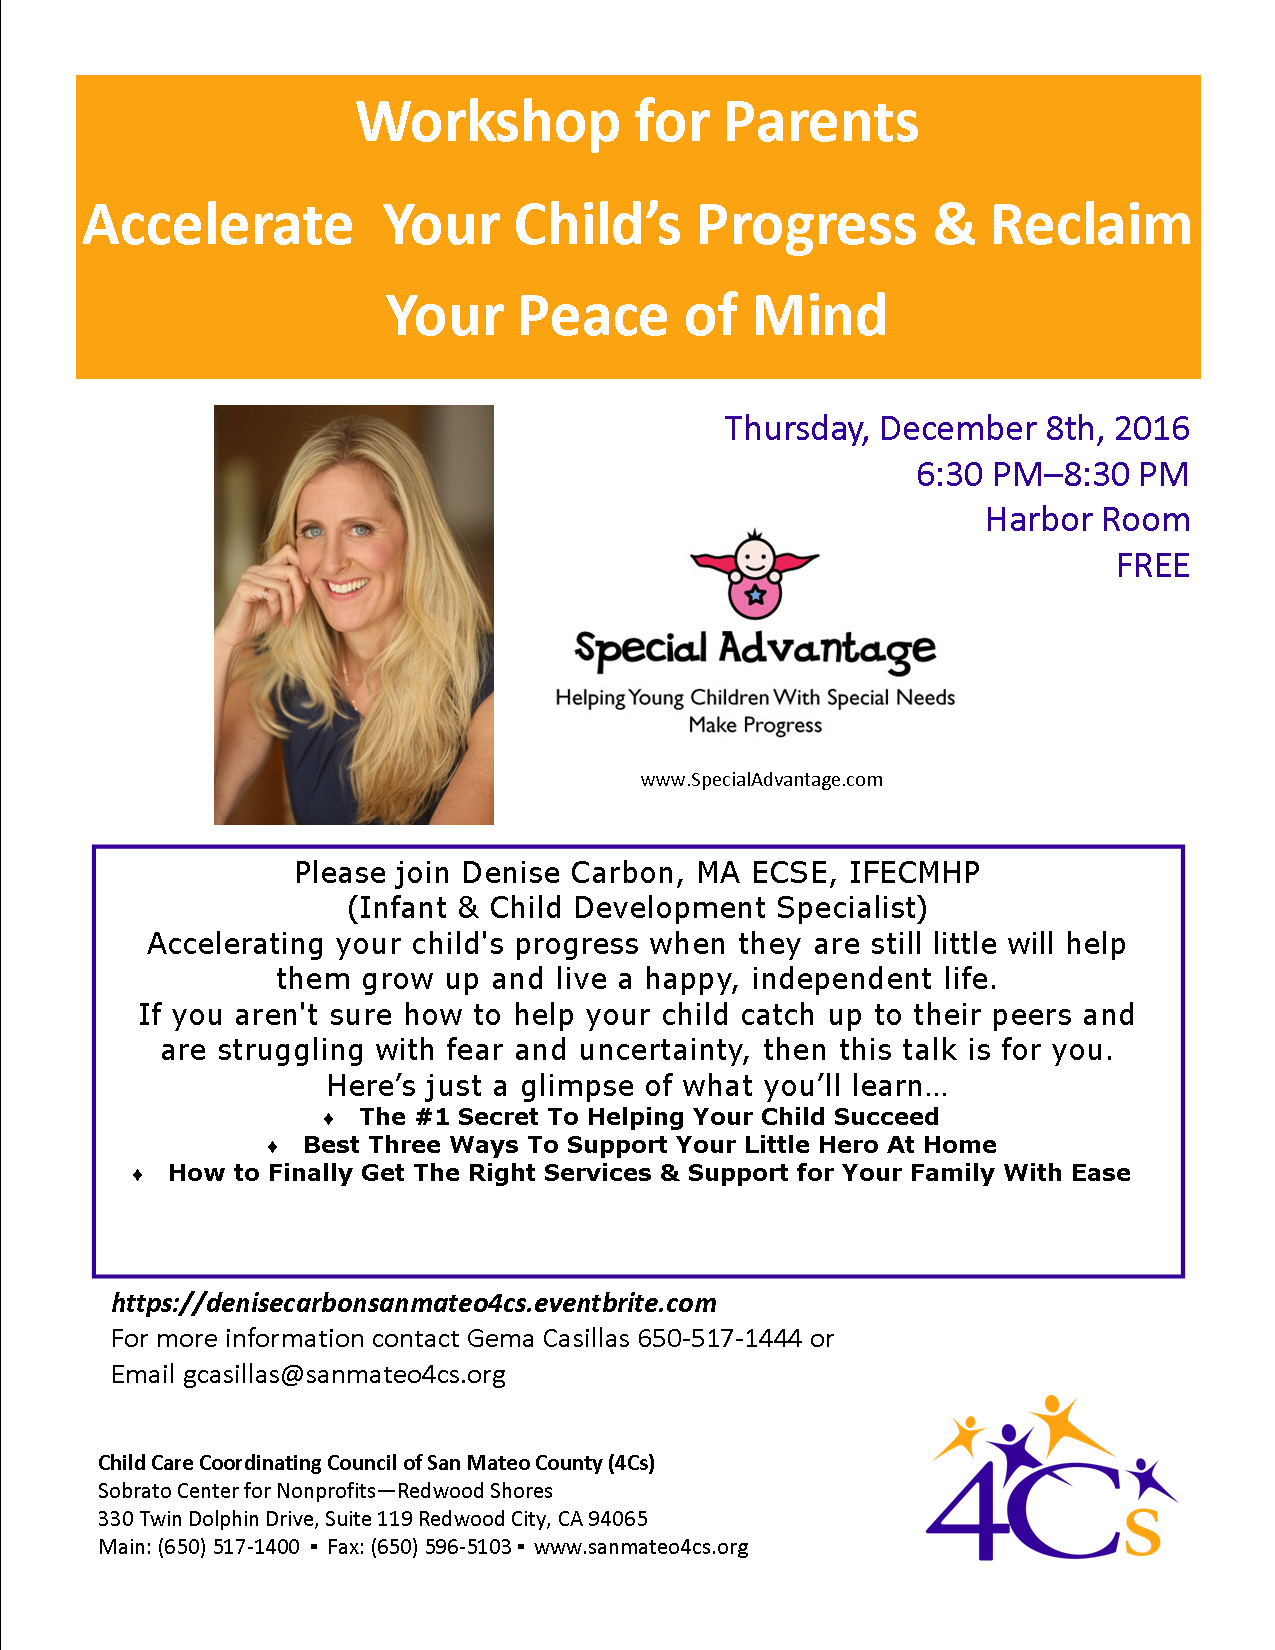 “Accelerate Your Child’s Progress & Reclaim Your Peace of Mind!”